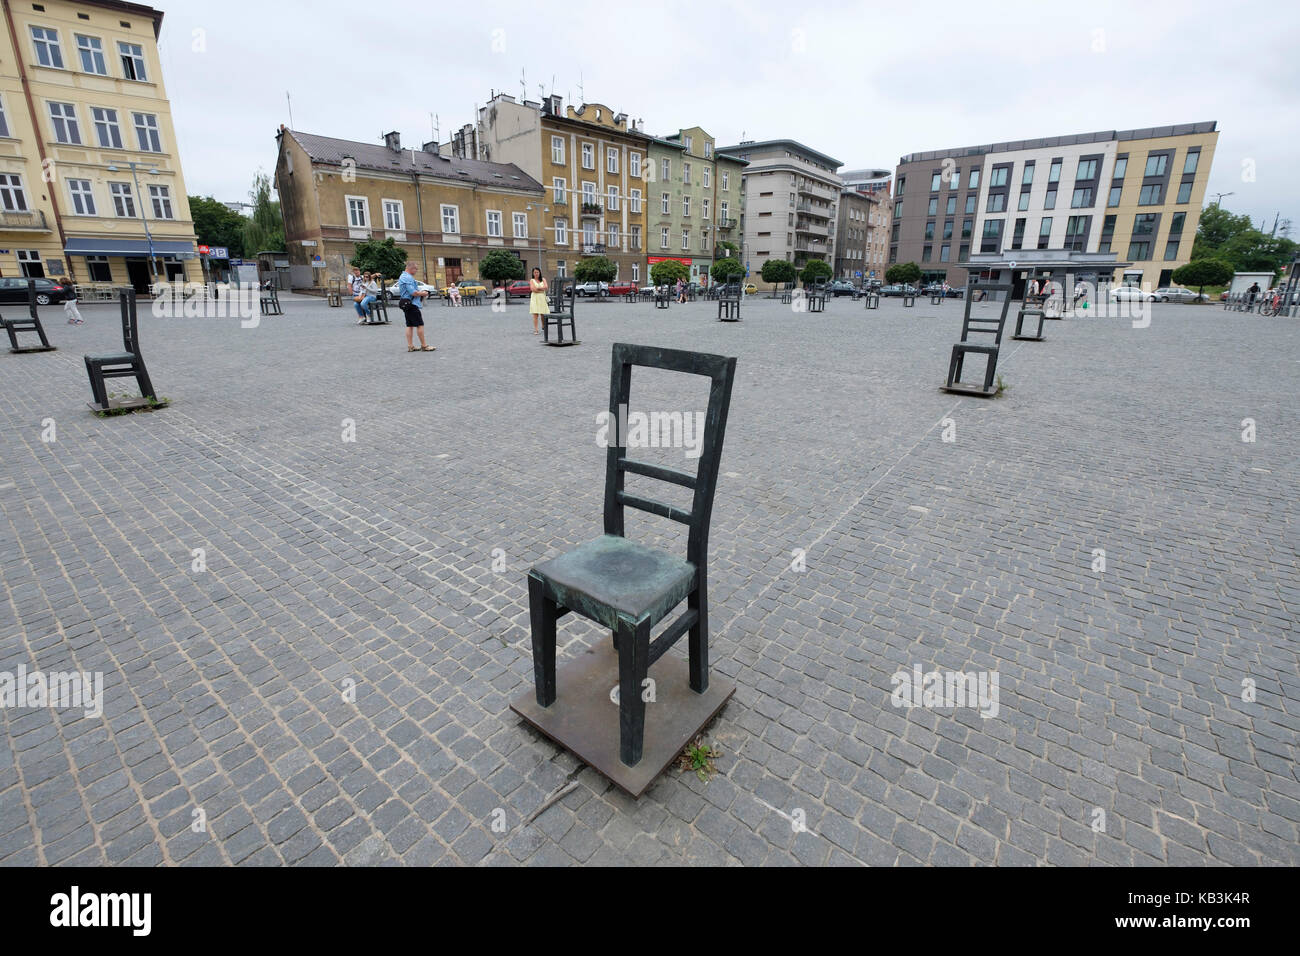 Metal chairs in memory of the jewish people killed on the Ghetto Heroes Square, Krakow, Poland, Europe Stock Photo